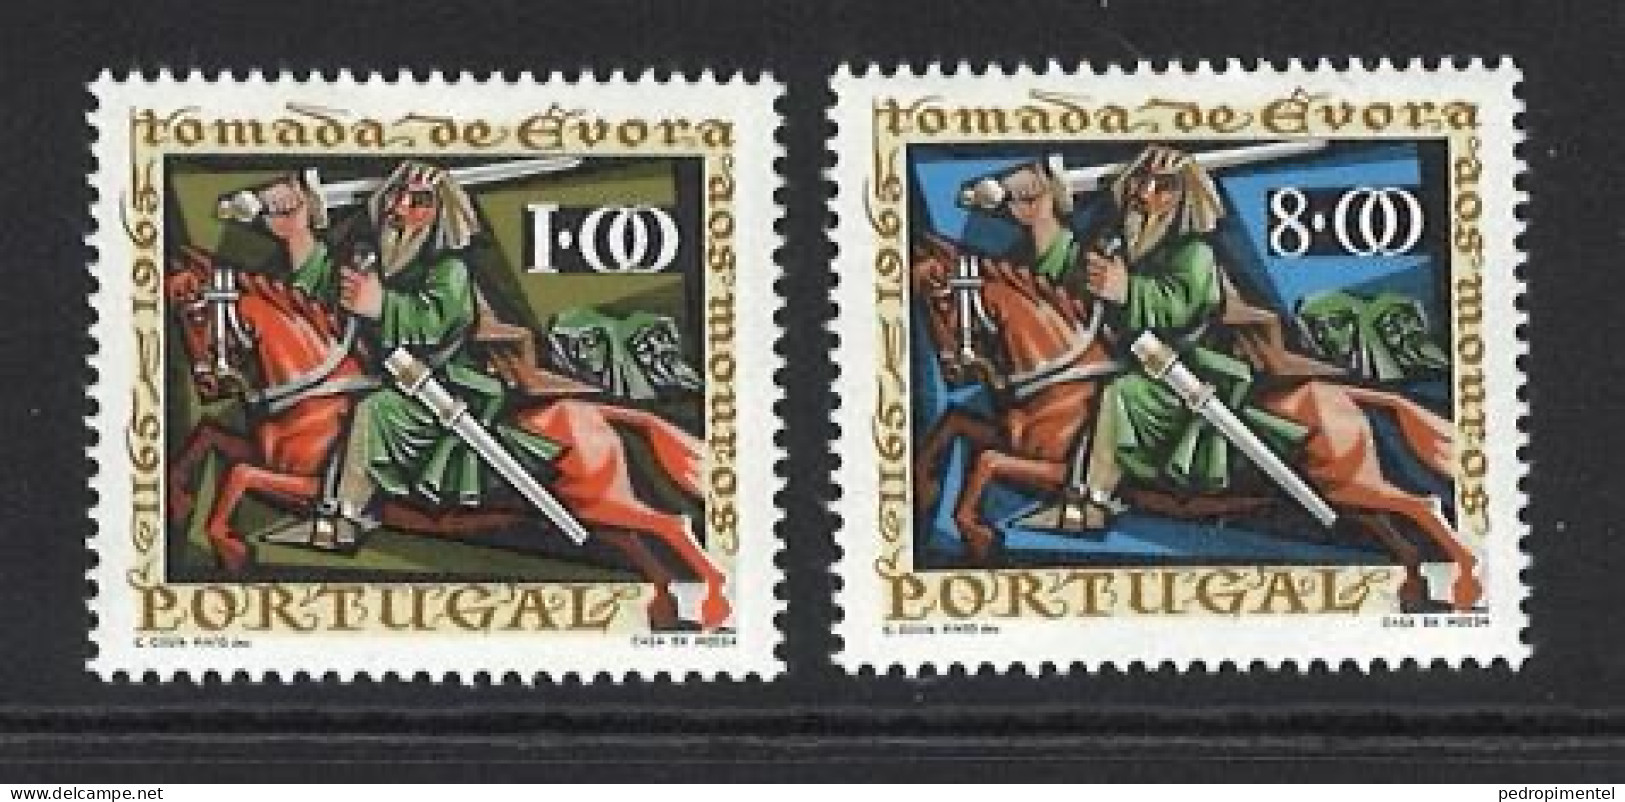 Portugal Stamps 1966 "Conquest Of Evora" Condition MHH #977-978 - Unused Stamps